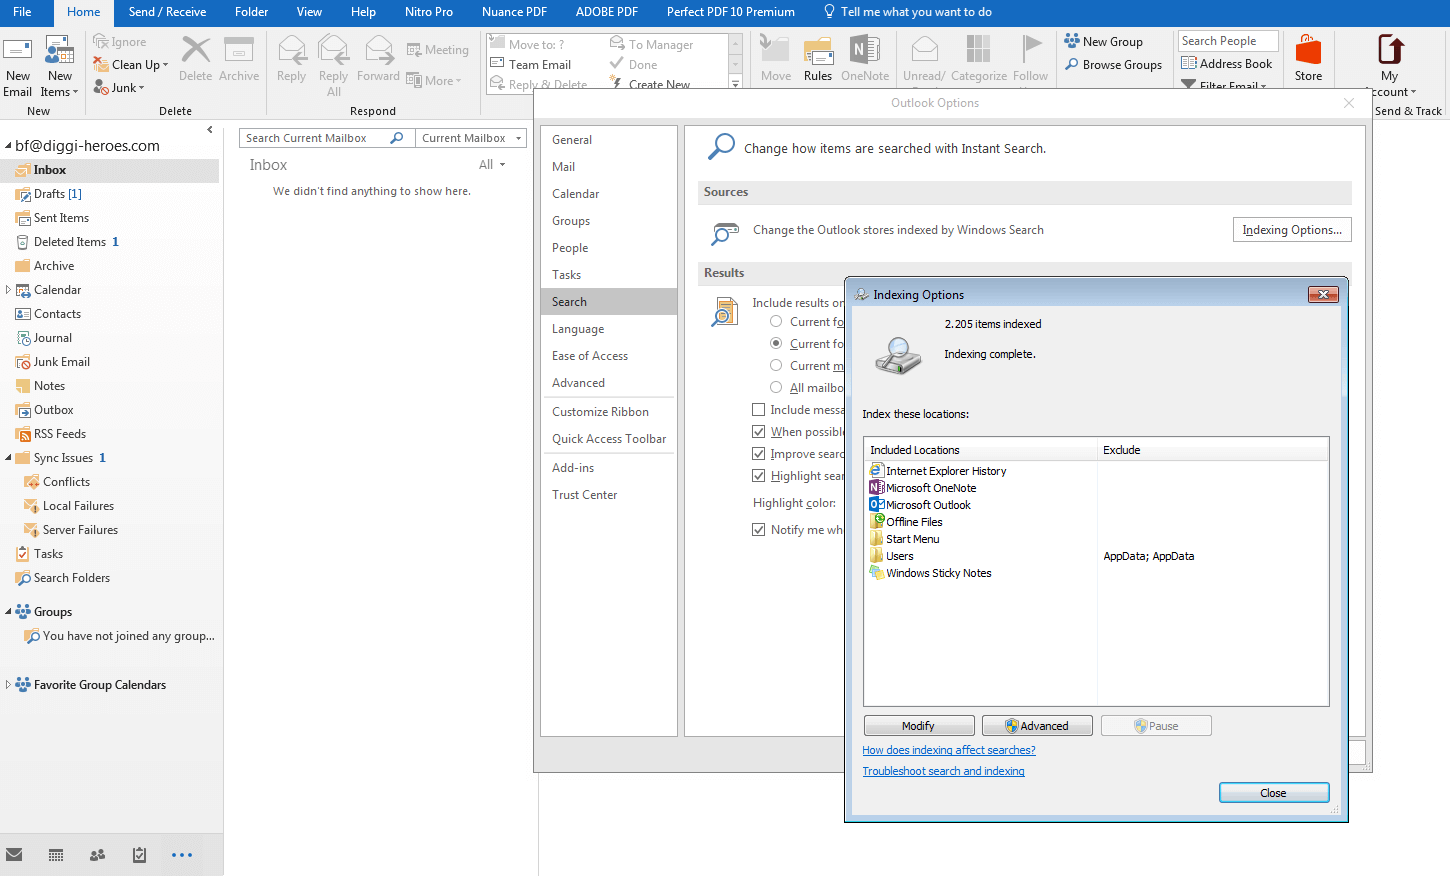 Check Outlook indexing options